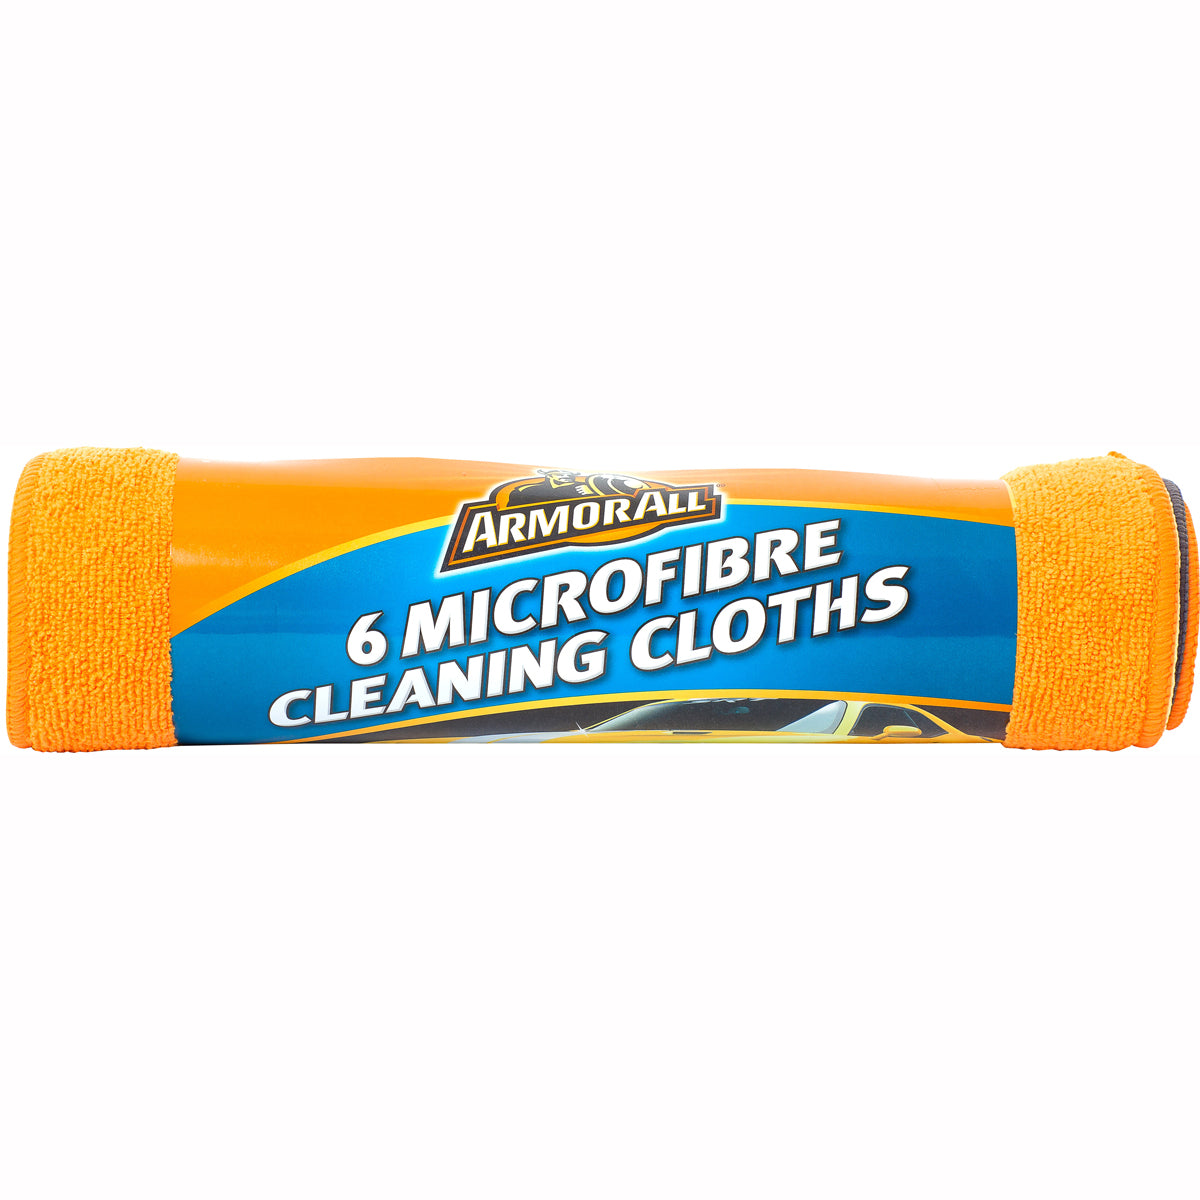 Armor All Microfibre Cleaning Cloths - 6 Pack